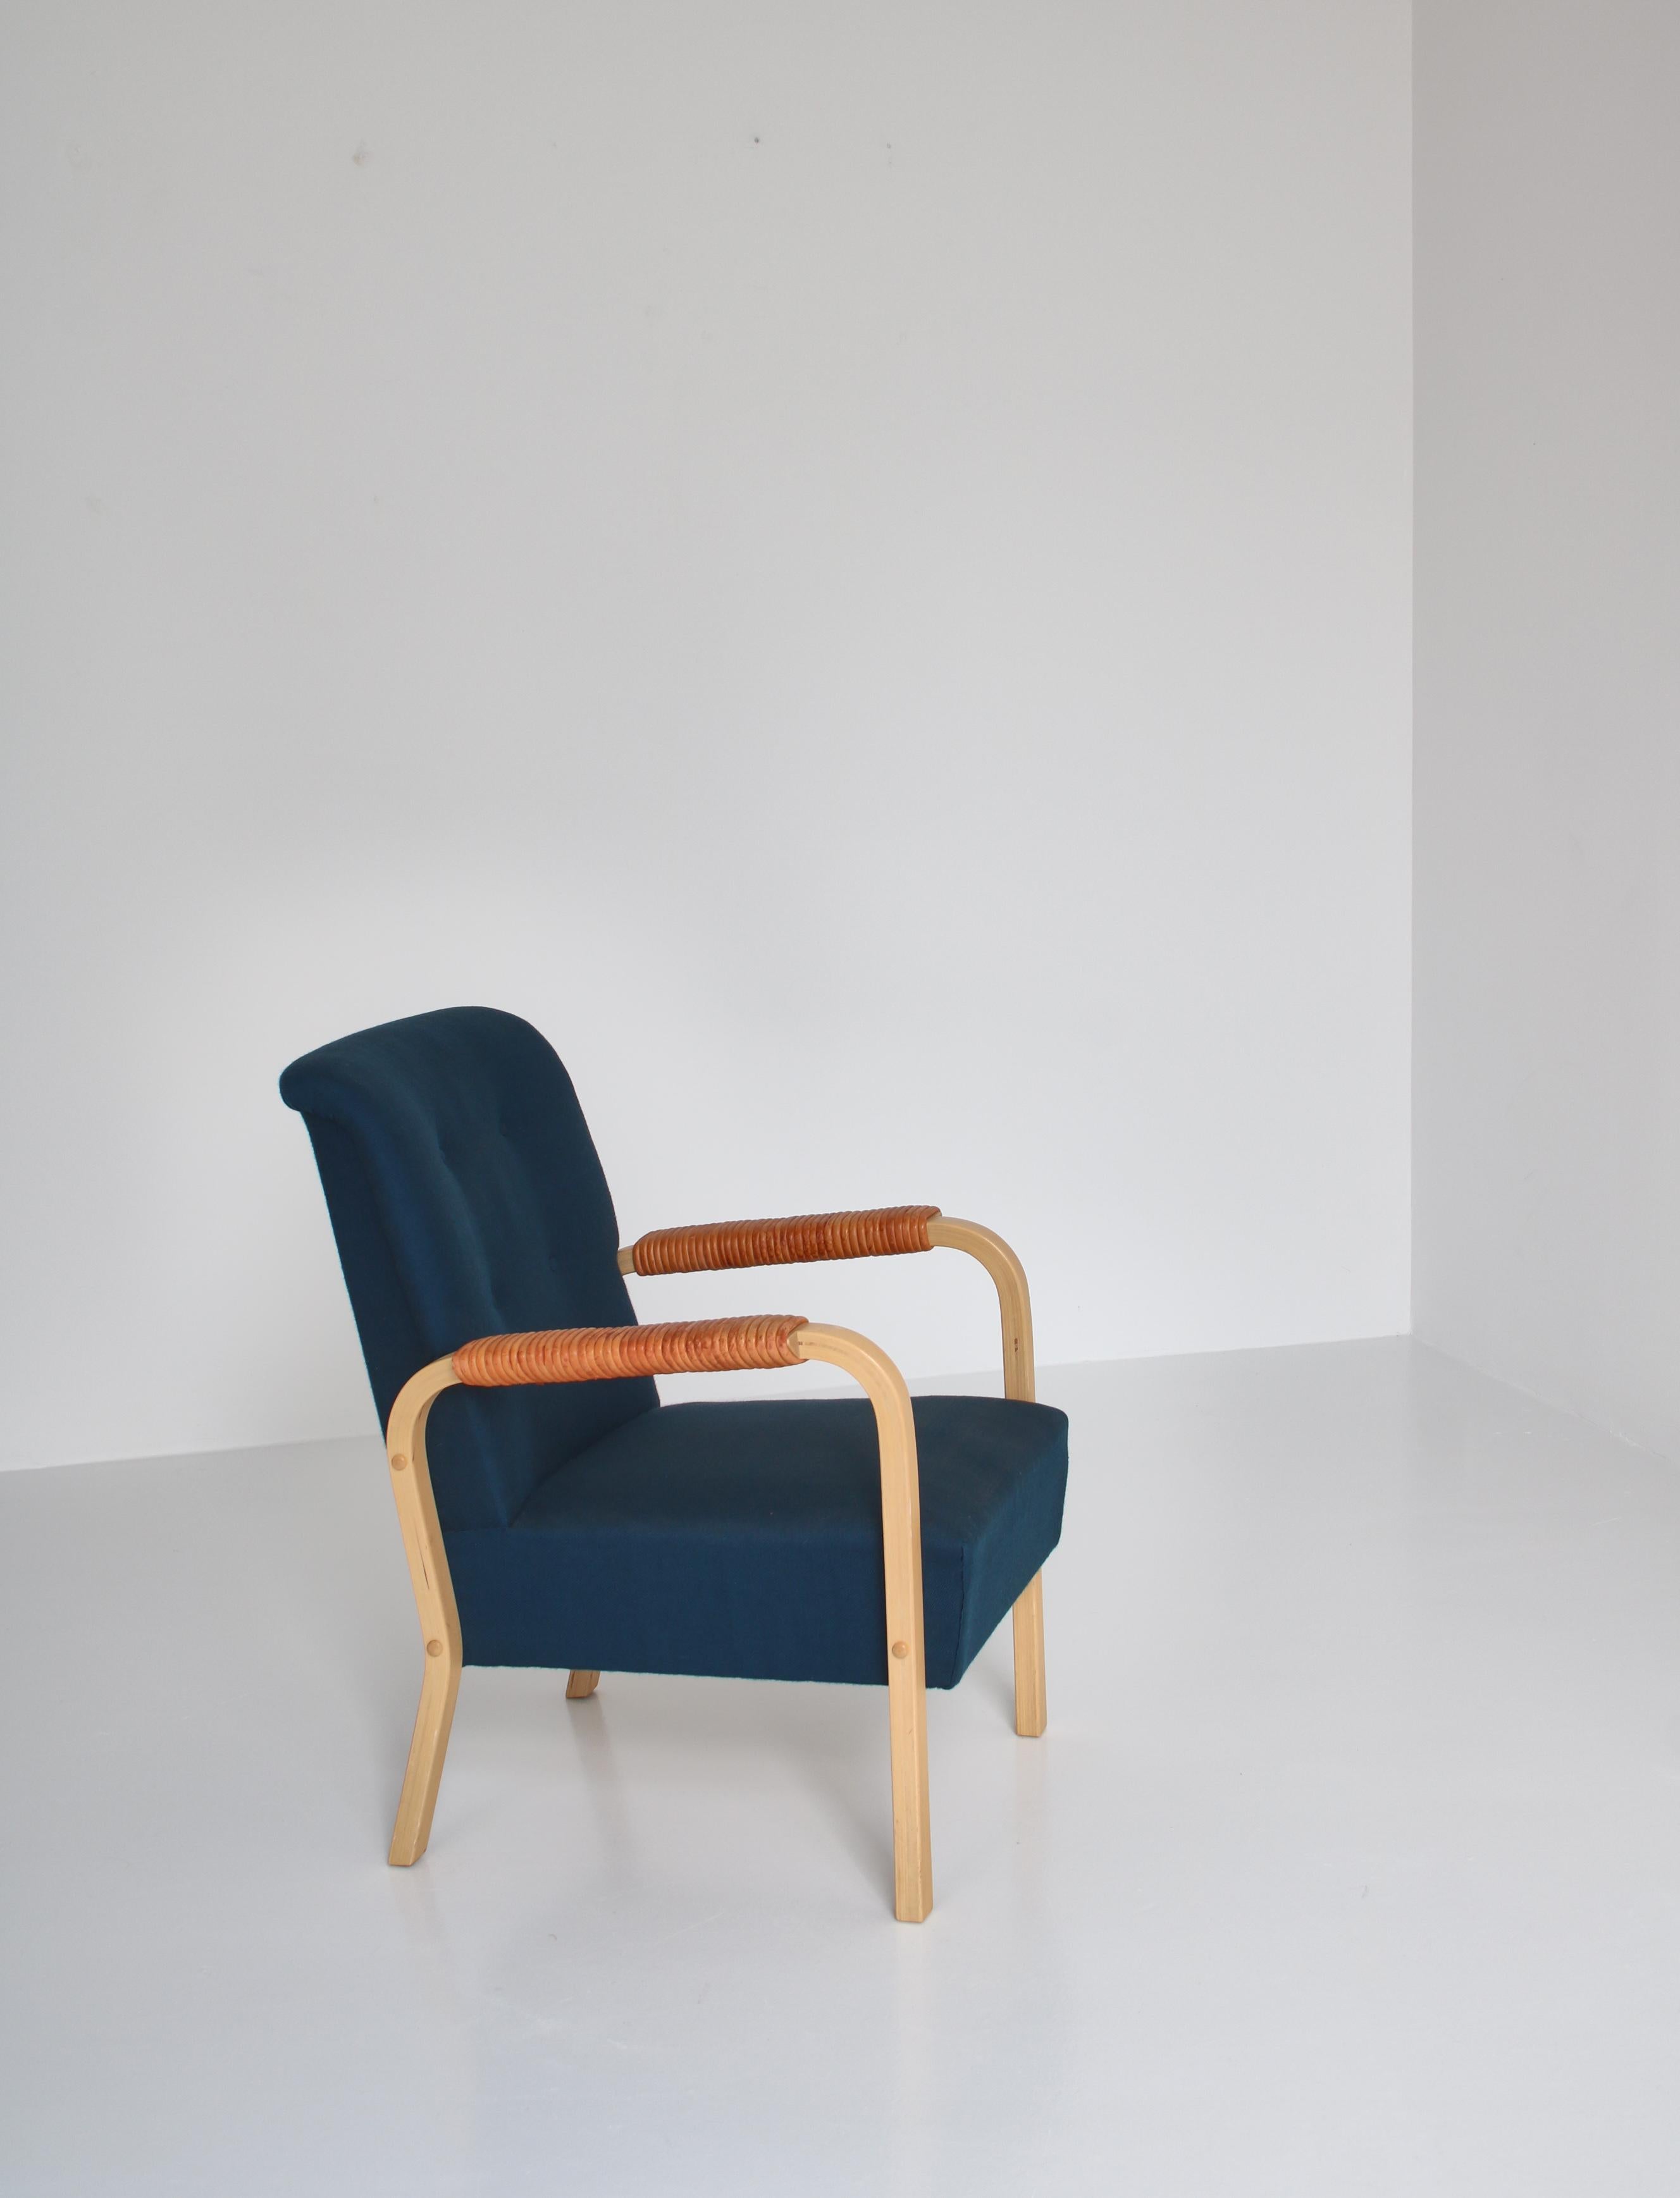 A rare vintage Alvar Aalto armchair in amazing condition. The chair was manufactured at Artek, Finland in the 1950s. Laminated birch and original blue wool upholstery. Leather wrapped armrests.